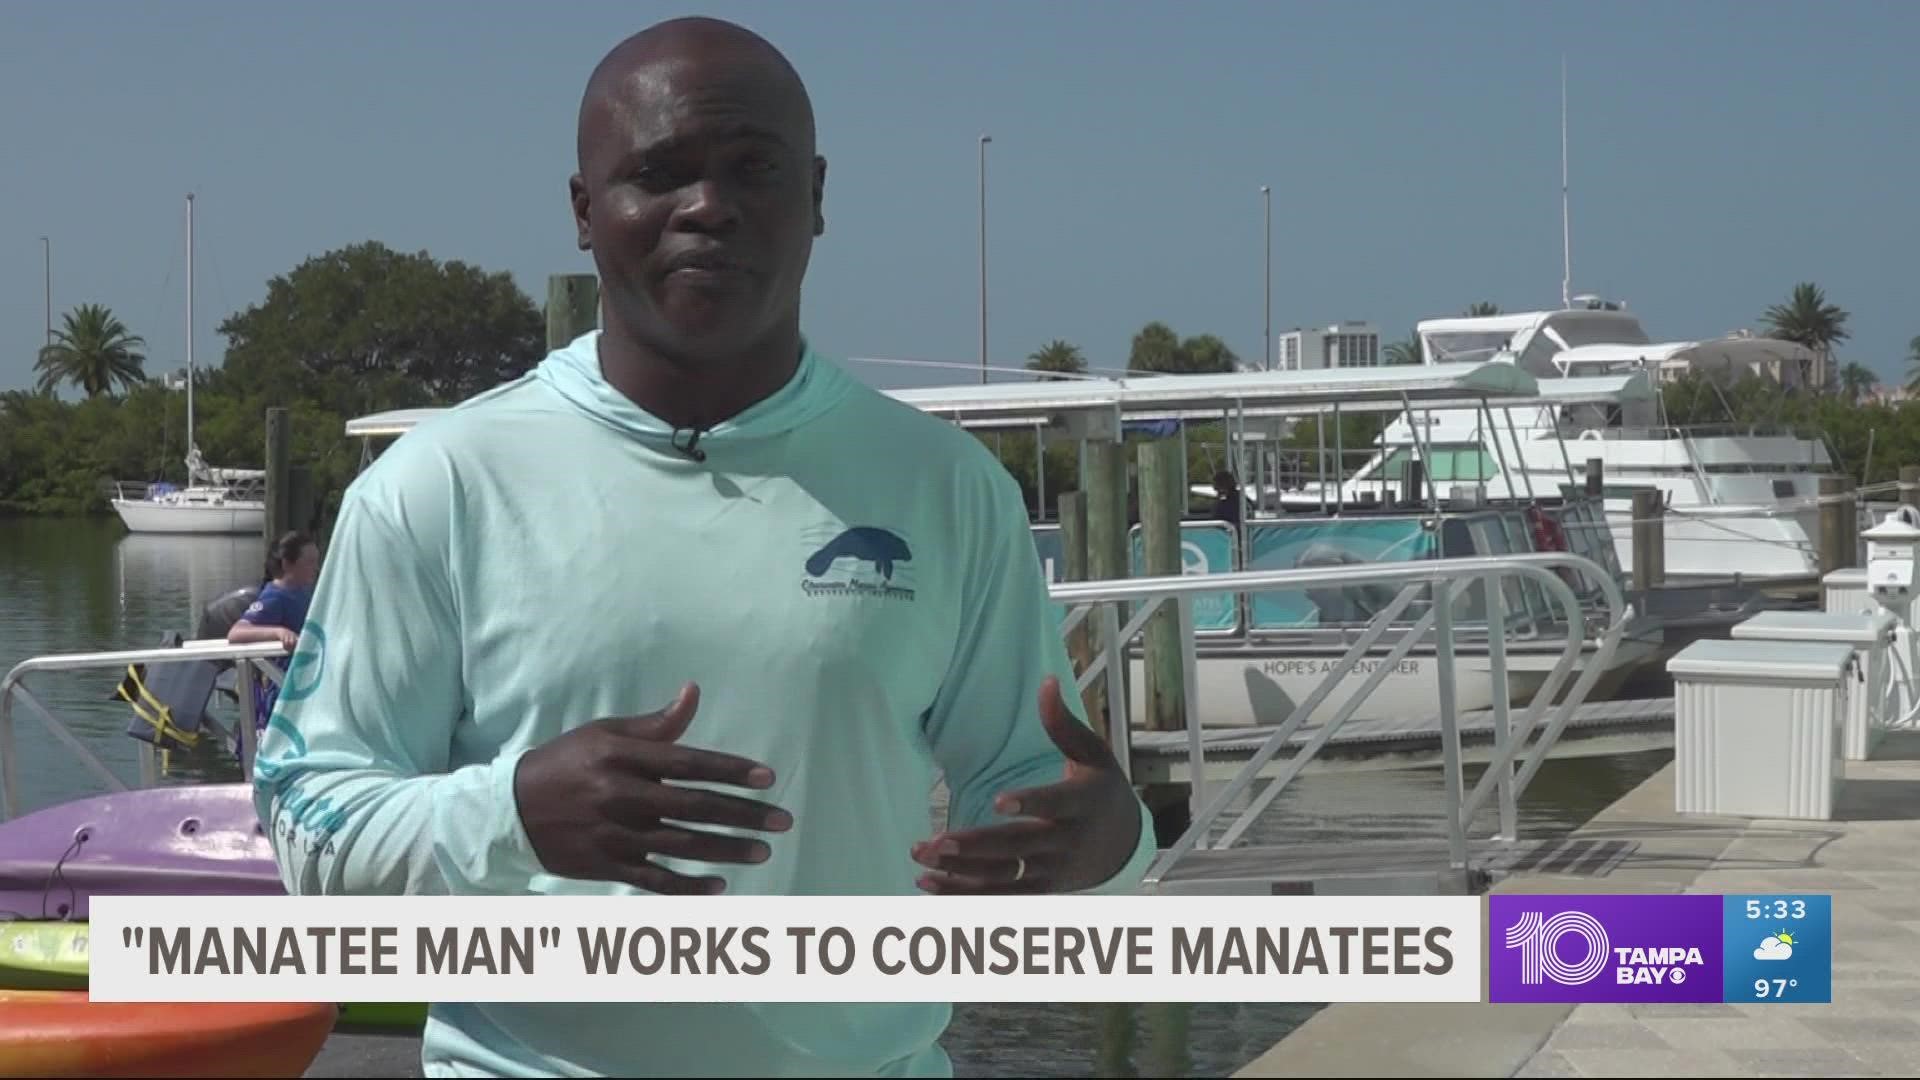 At just the age of 11, Jamal Galves found his calling in life to help manatees.